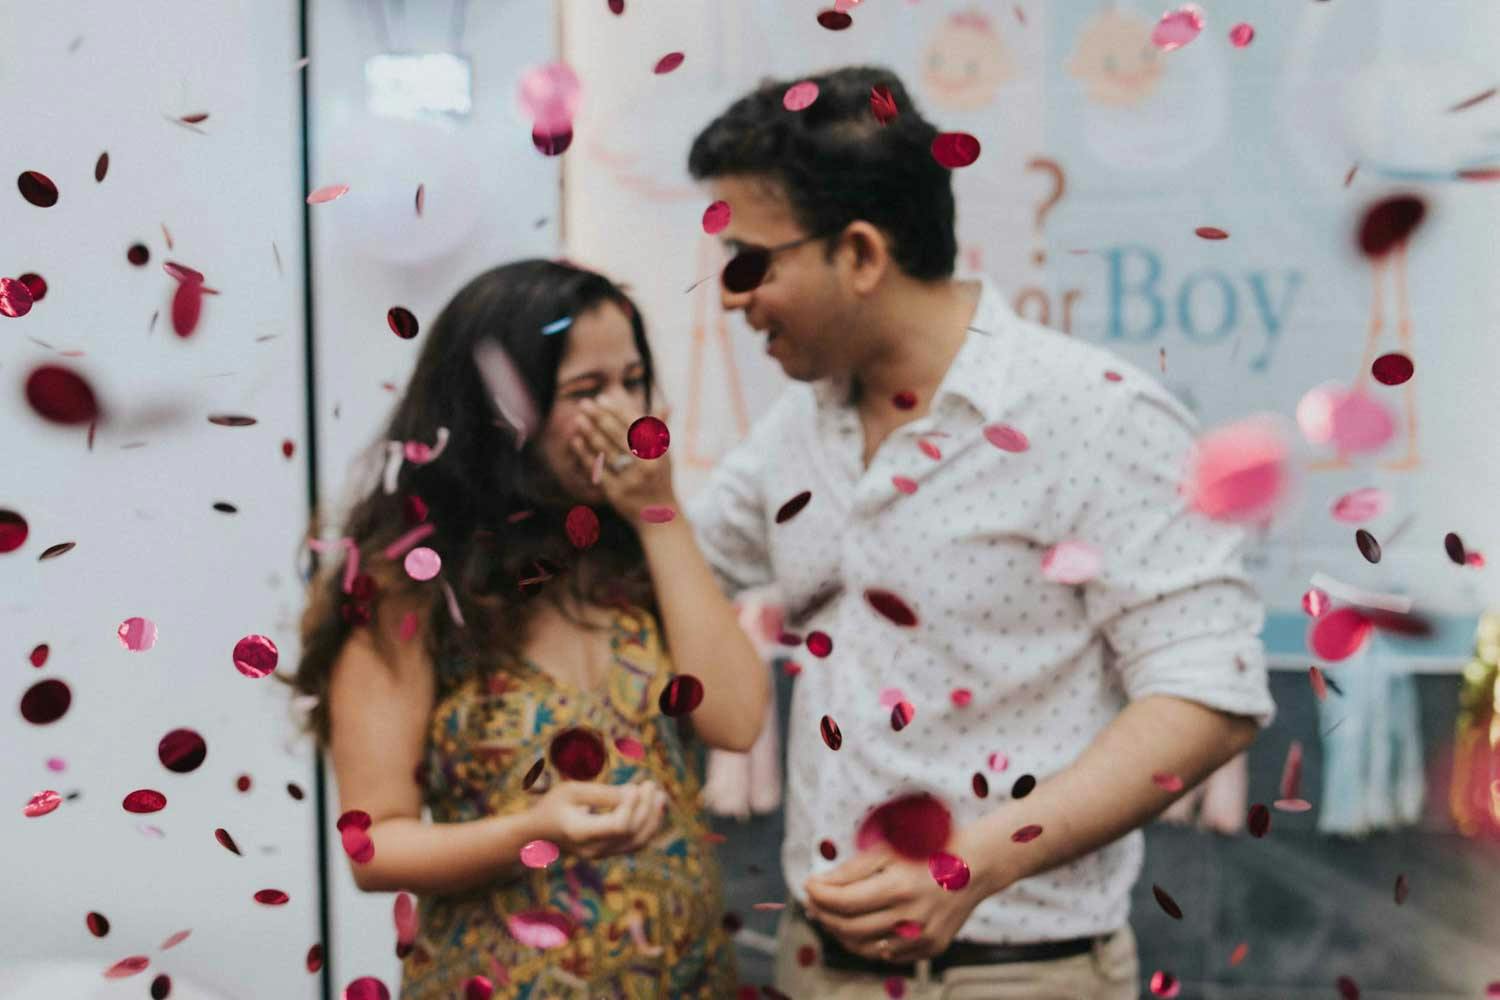 pregnant lady at gender reveal crying in joy with pink confetti flying photography